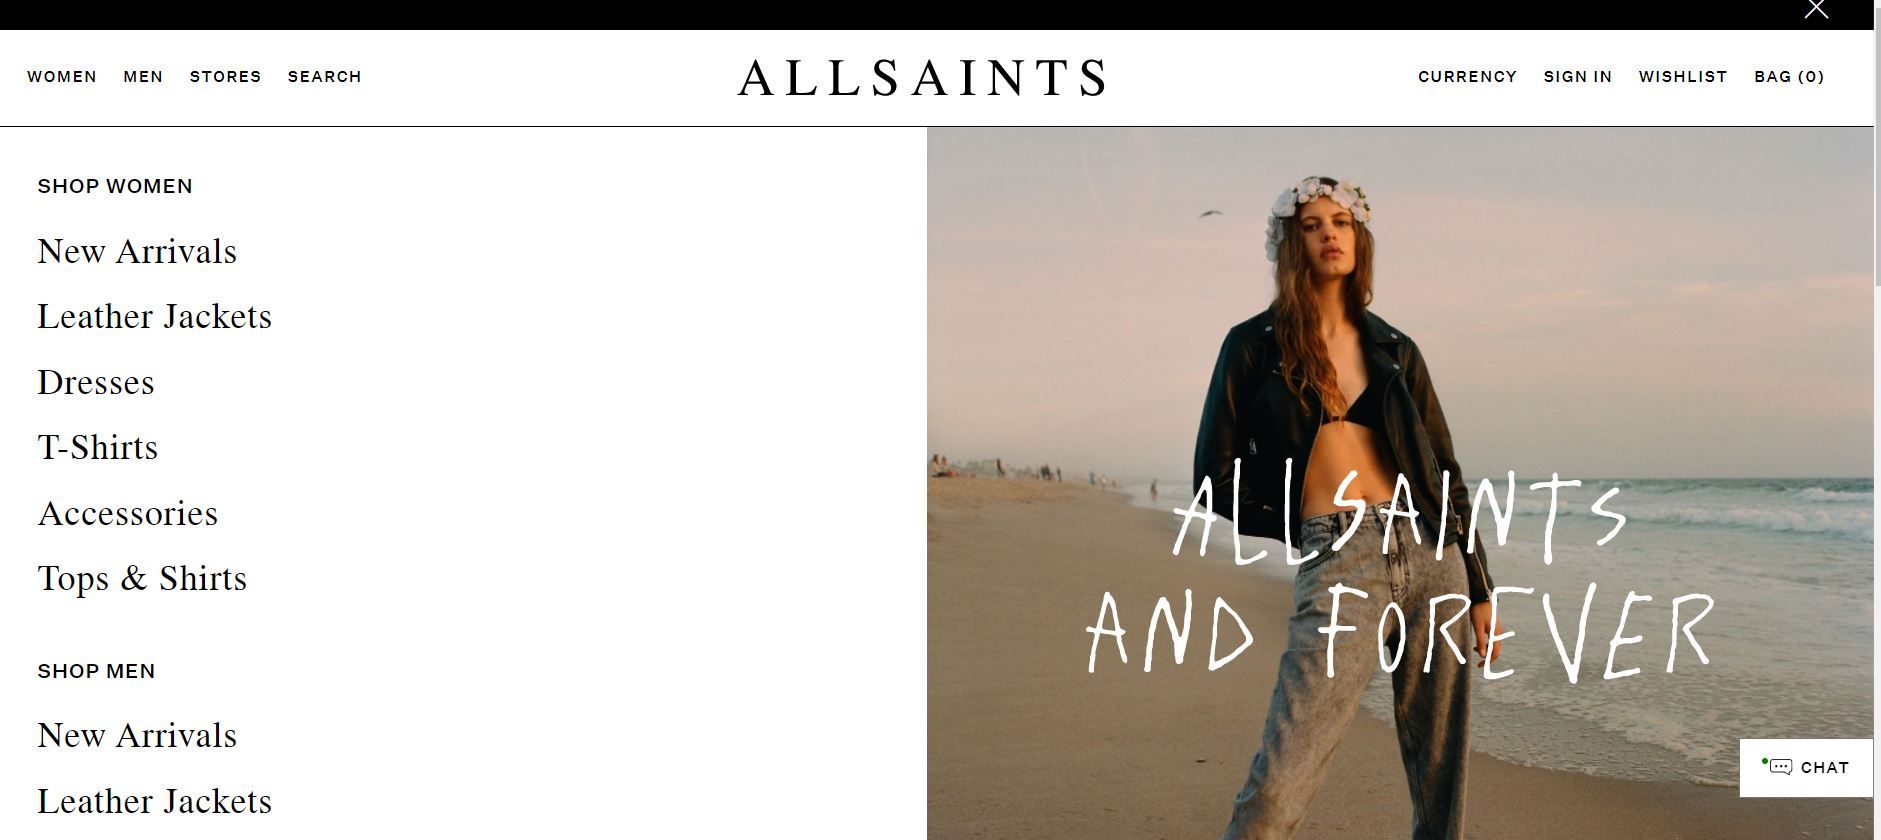 AllSaints plans for peak fashion with thinkTribe's managed load testing service